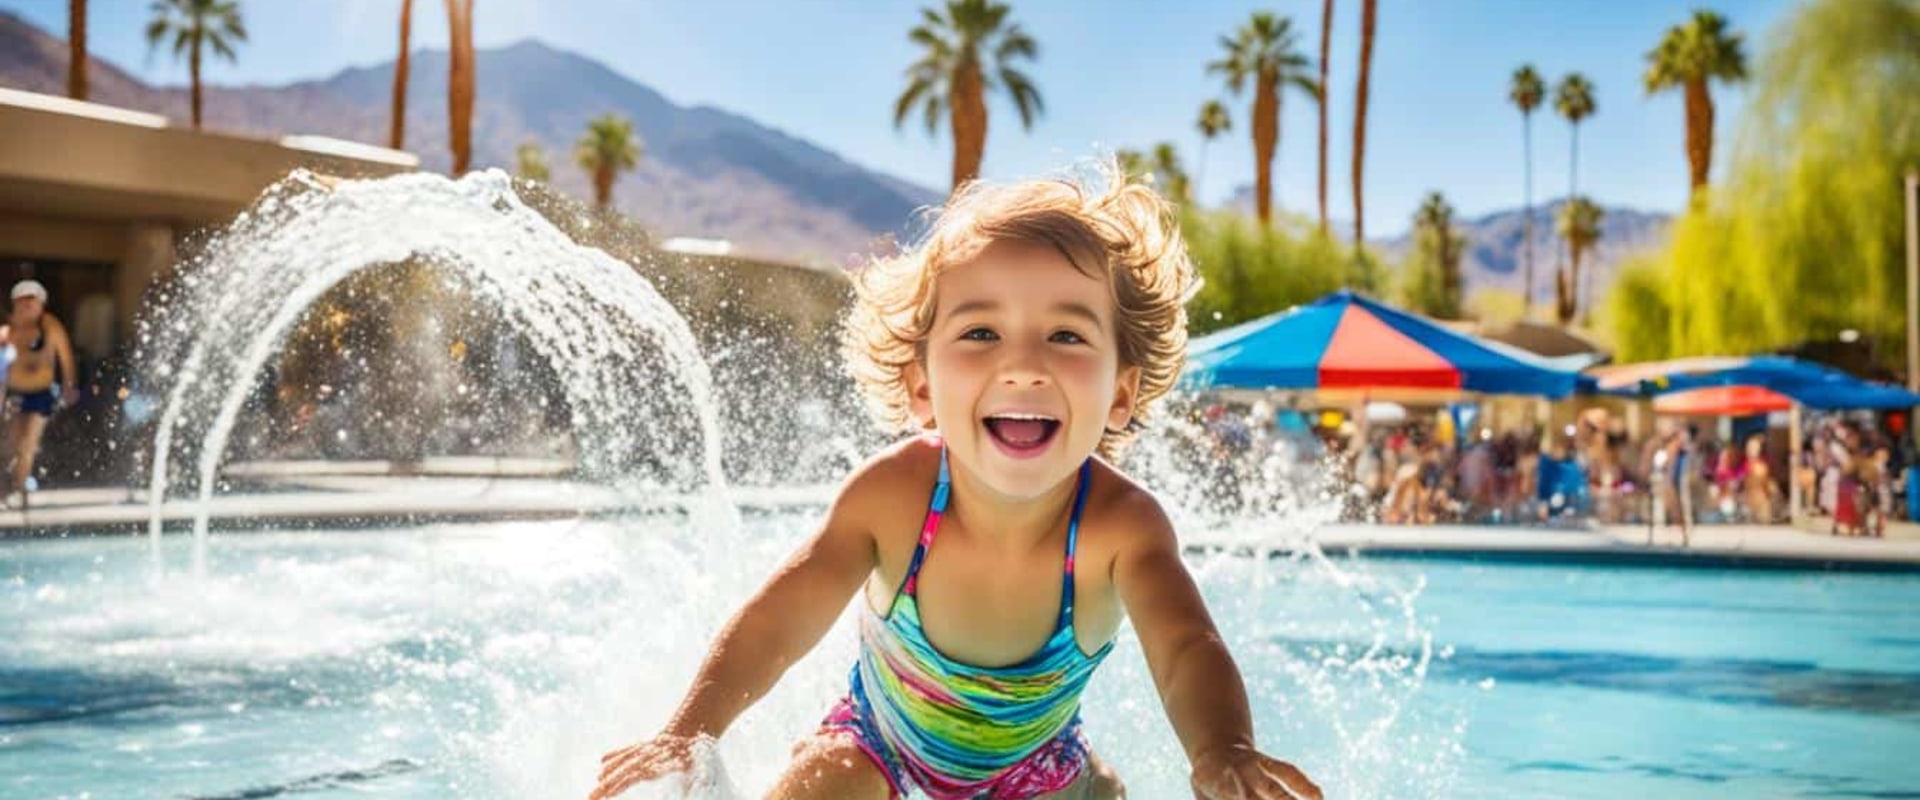 Bringing Your Children to Coachella Valley Wellness Recreation: What You Need to Know